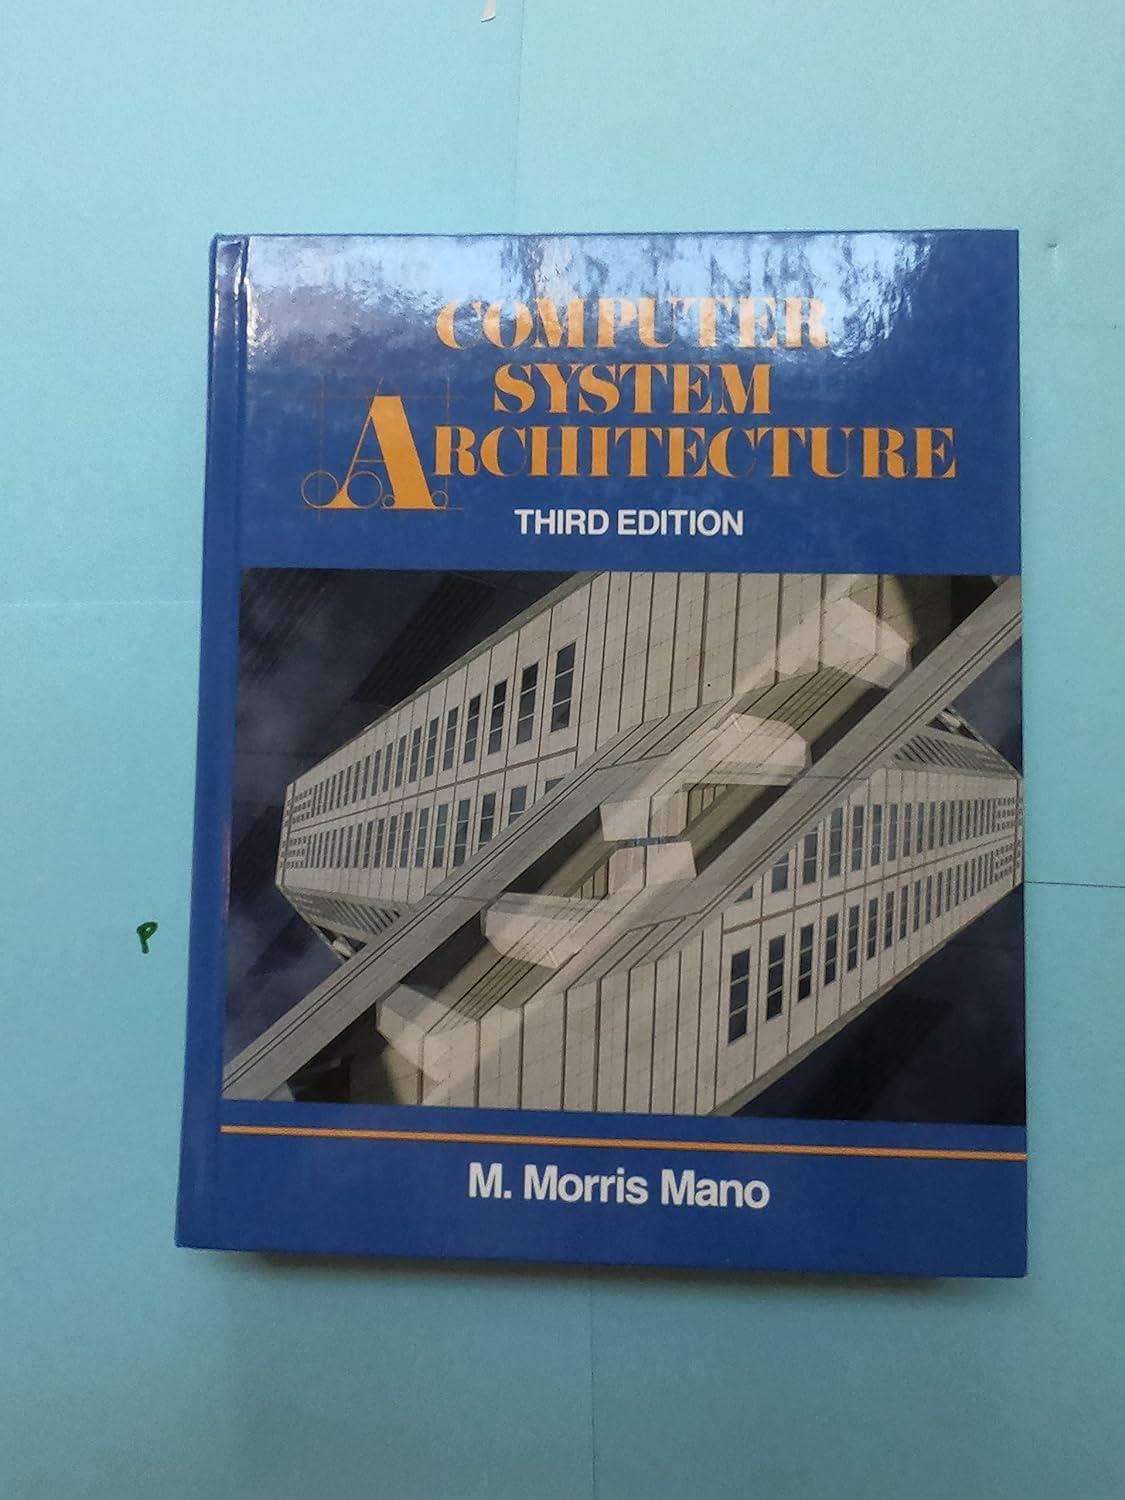 computer system architecture 3rd edition m. morris mano 0131755633, 978-0131755635